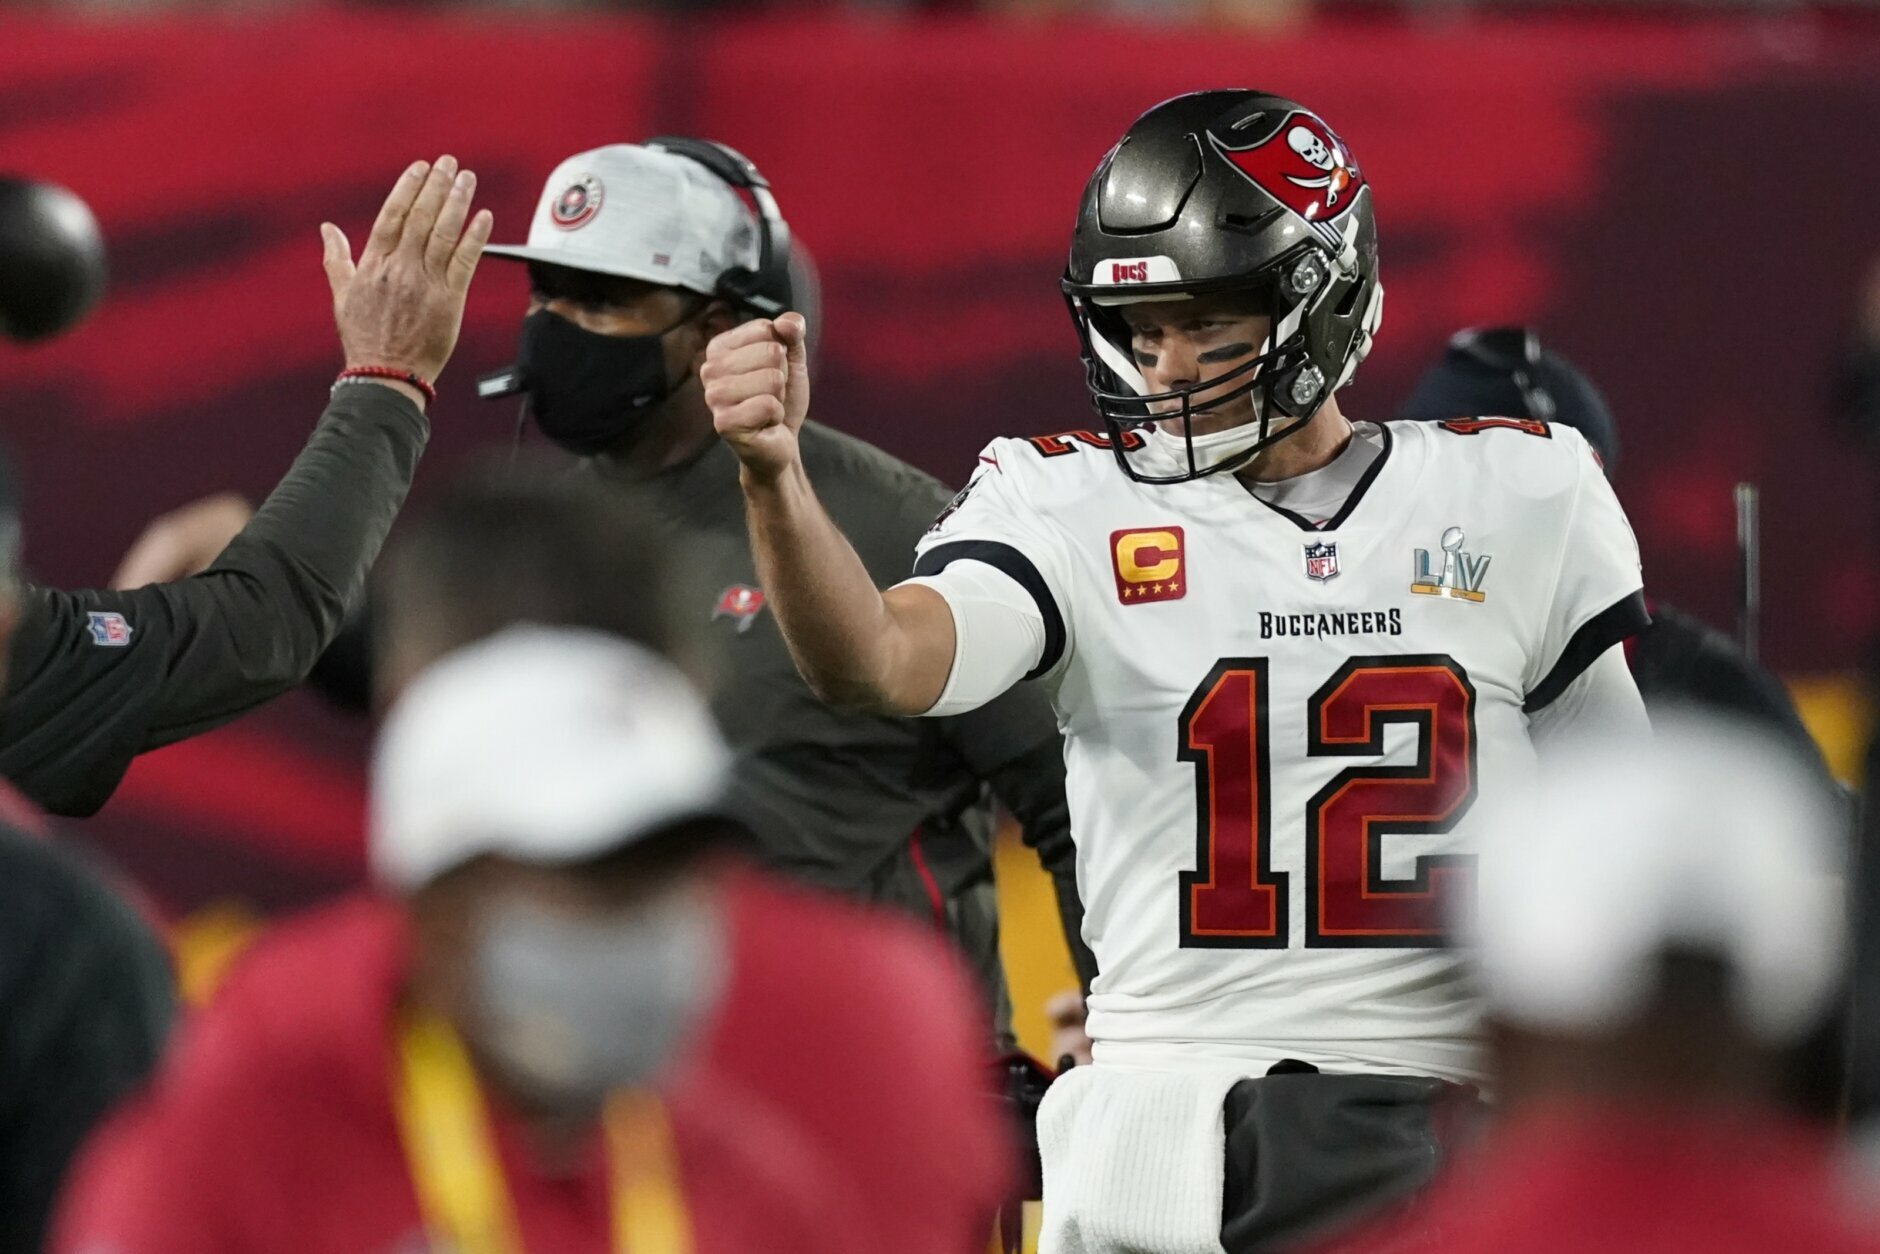 Tampa Bay Buccaneers quarterback Tom Brady celebrates after his team scored a touchdown against the Kansas City Chiefs during the first half of the NFL Super Bowl 55 football game Sunday, Feb. 7, 2021, in Tampa, Fla. (AP Photo/Ashley Landis)